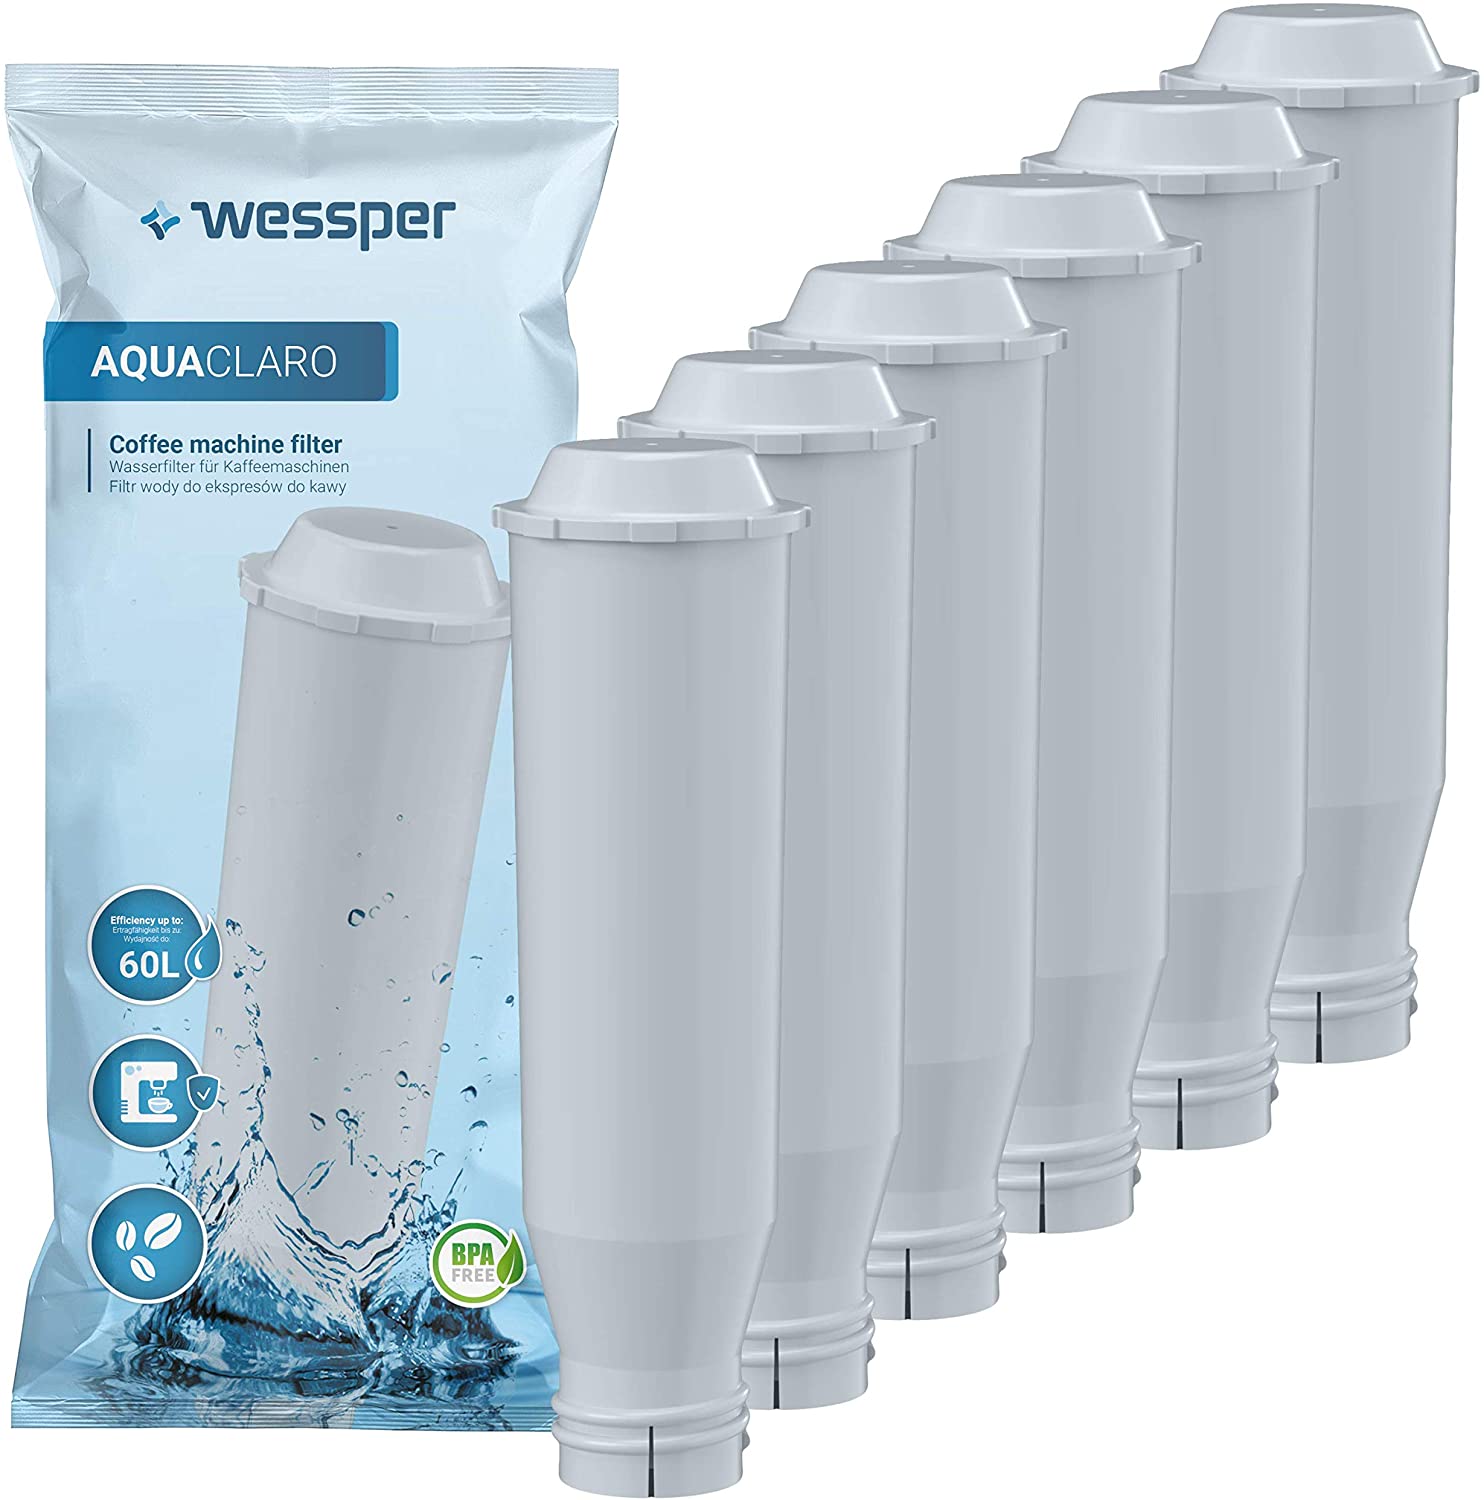 Wessper Water Filter Compatible with Krups Claris F088 F 088, Fits Many Models from Krups, Siemens, Bosch, AEG, Tefal, Neff, Gaggenau (Pack of 6)